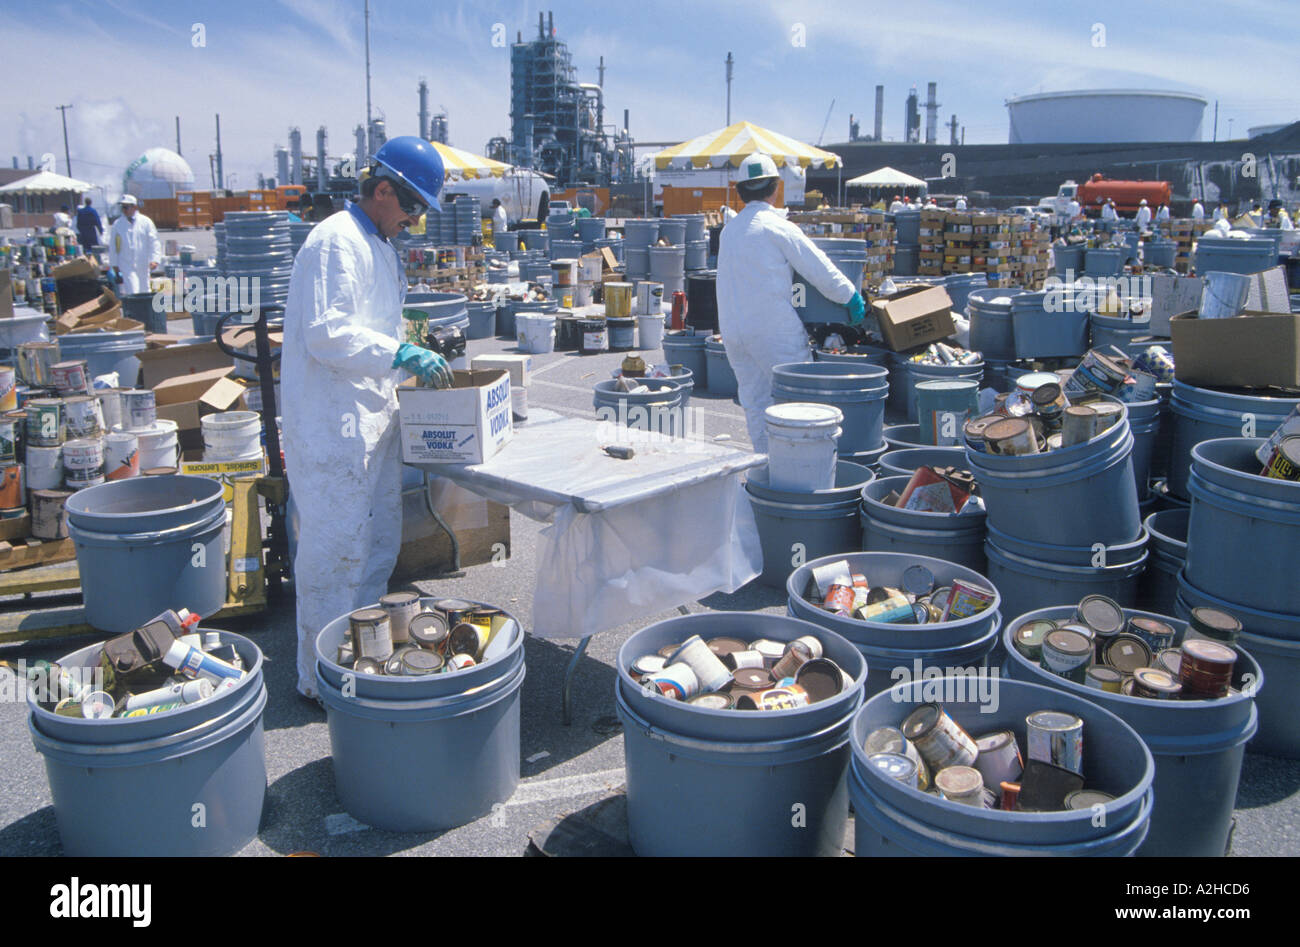 Workers handle toxic household wastes such as paint and oil at a drive through toxic waste cleanup site on Earth Day in the Stock Photo